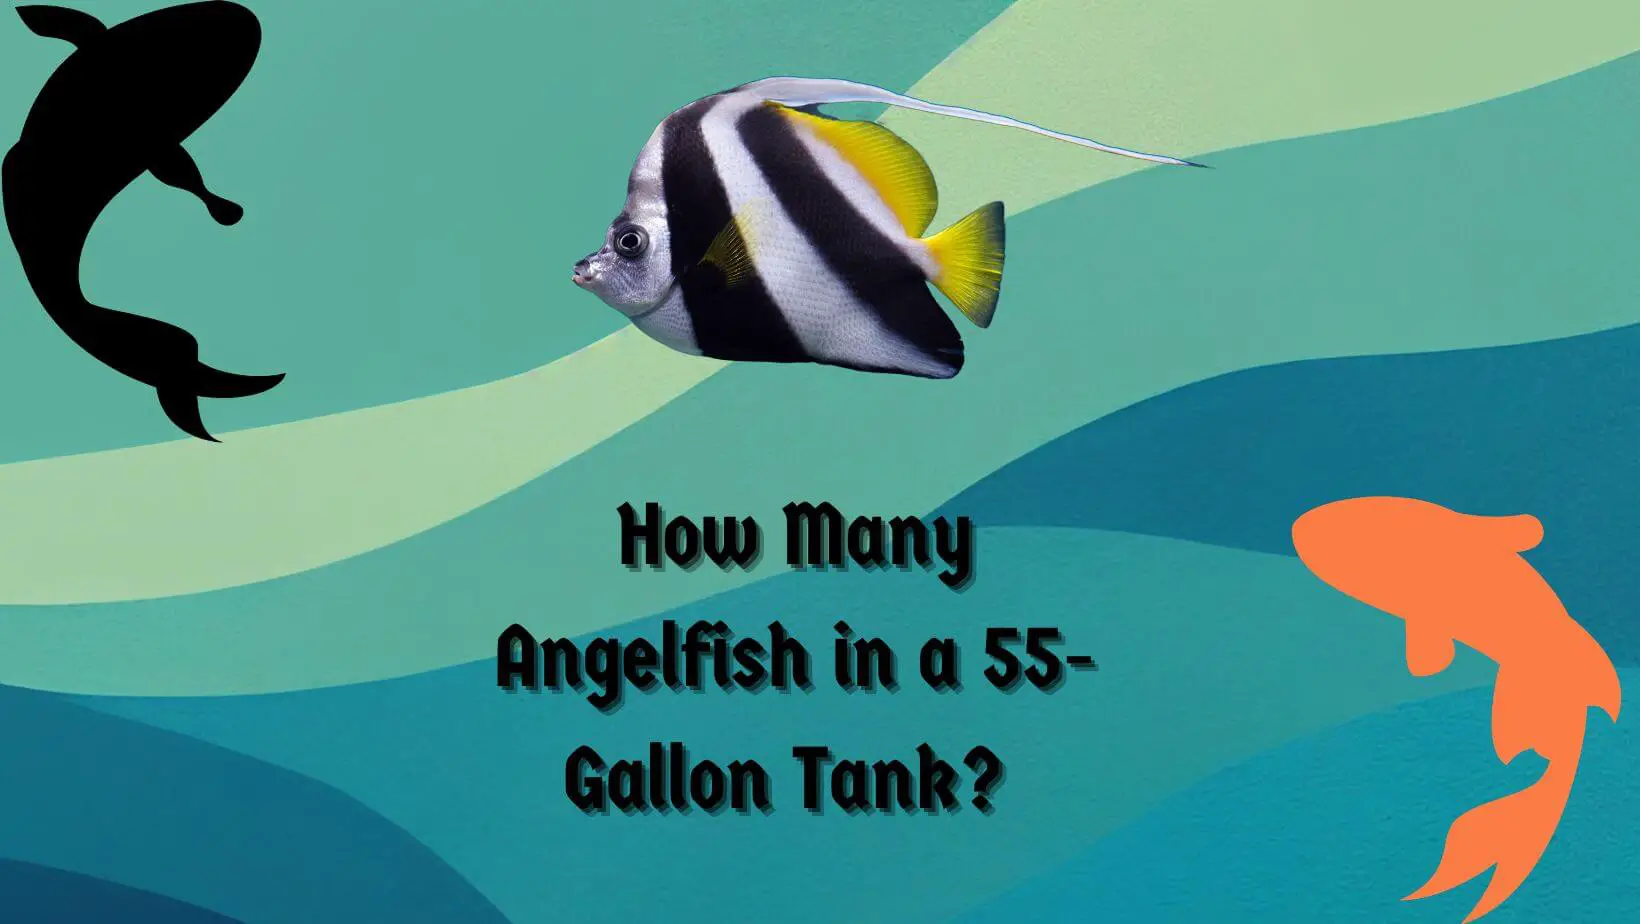 _How Many Angelfish in a 55-Gallon Tank